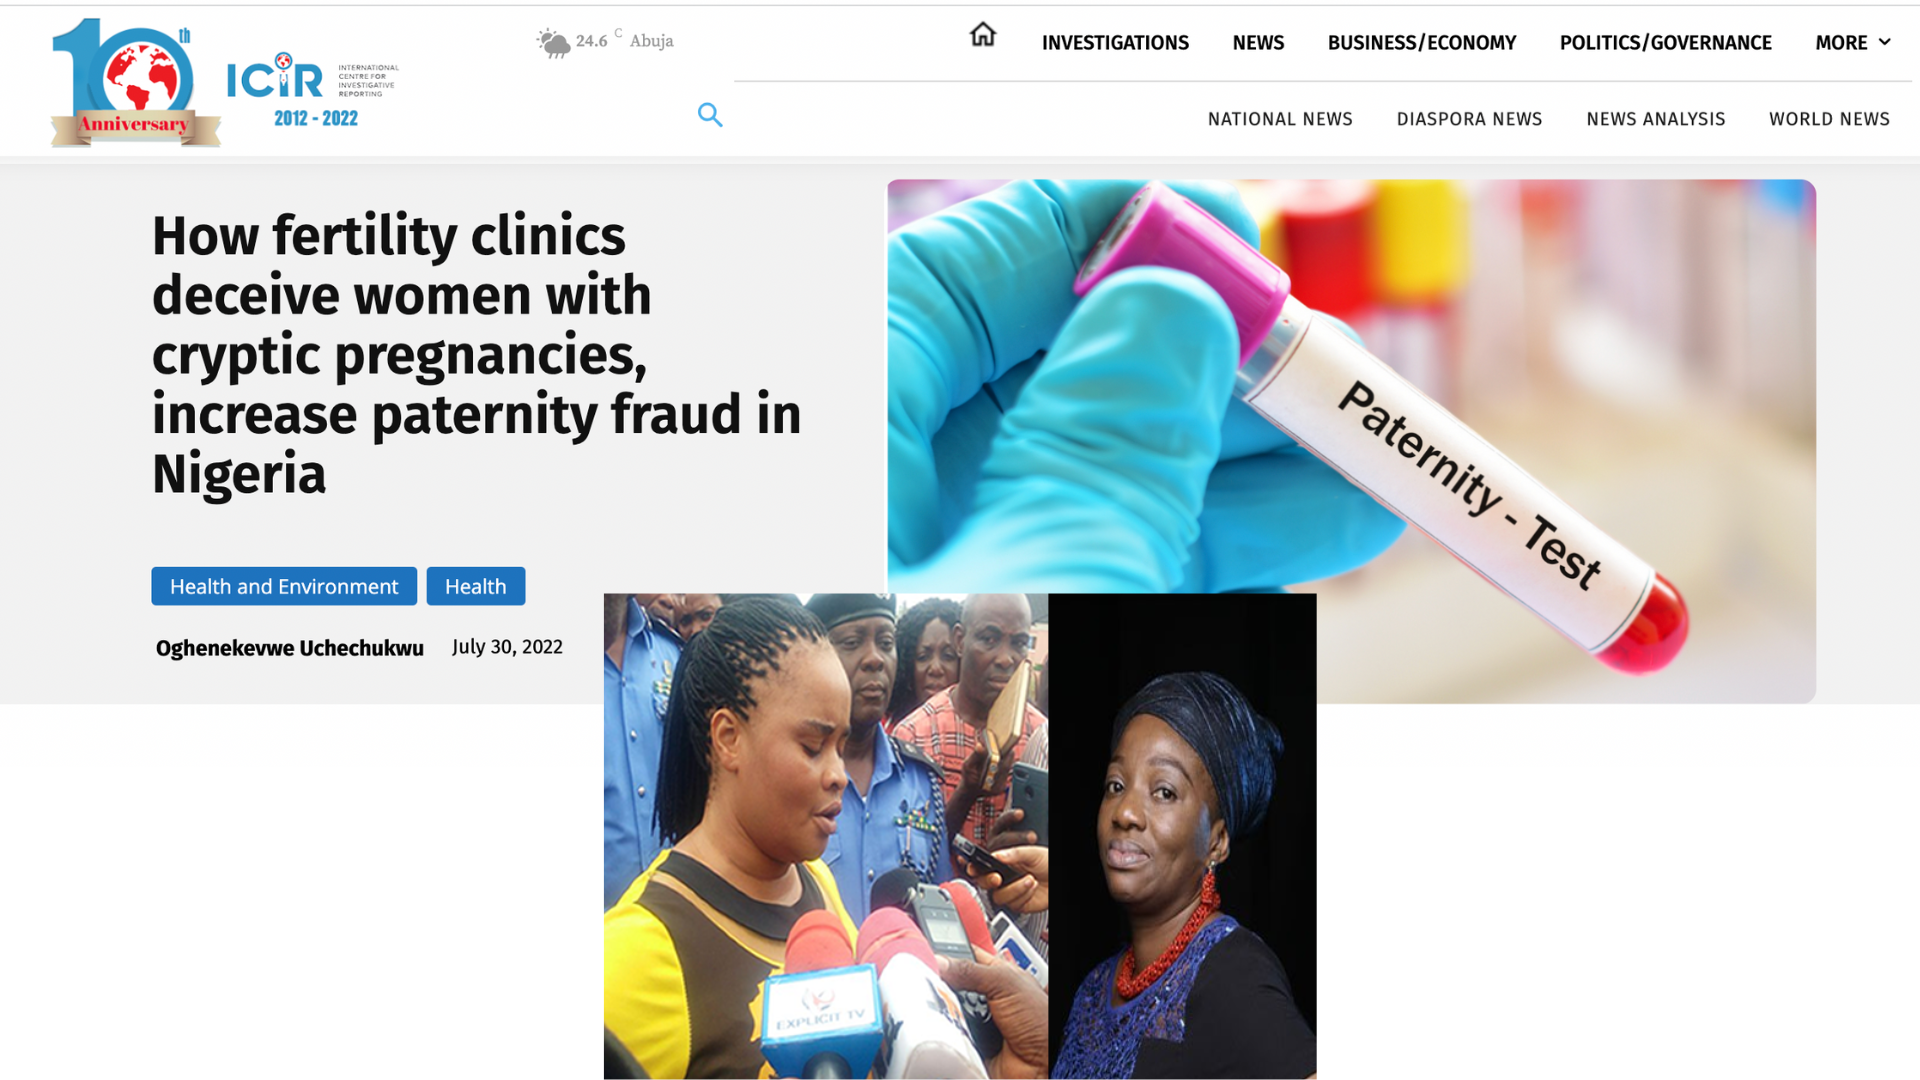 How fertility clinics deceive women with cryptic pregnancies, increase paternity fraud in Nigeria